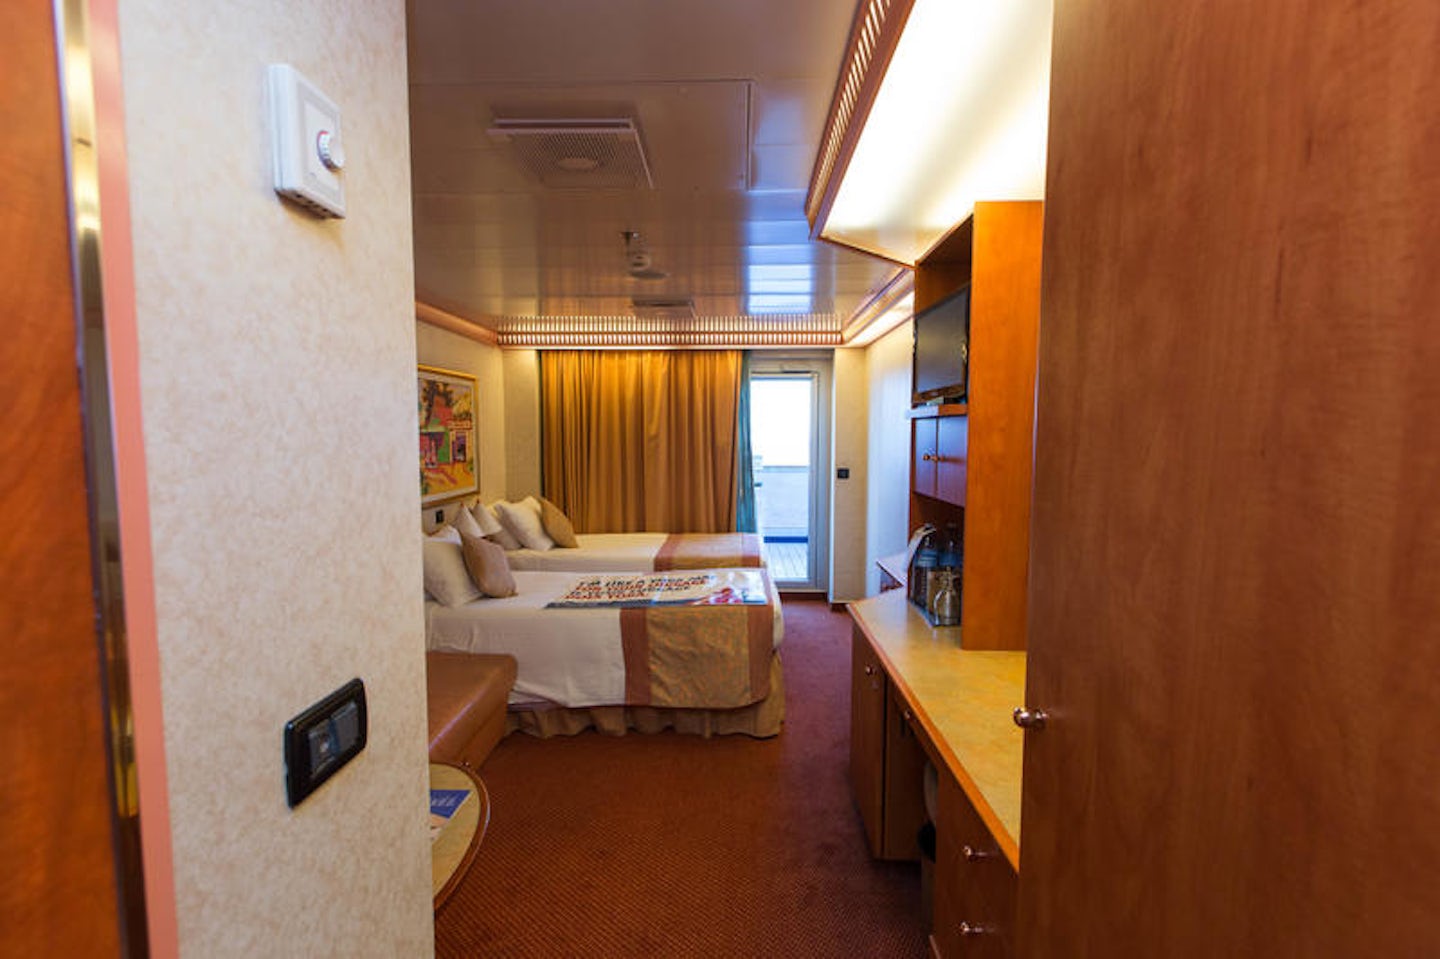 The Aft-View Extended Balcony Cabin on Carnival Freedom